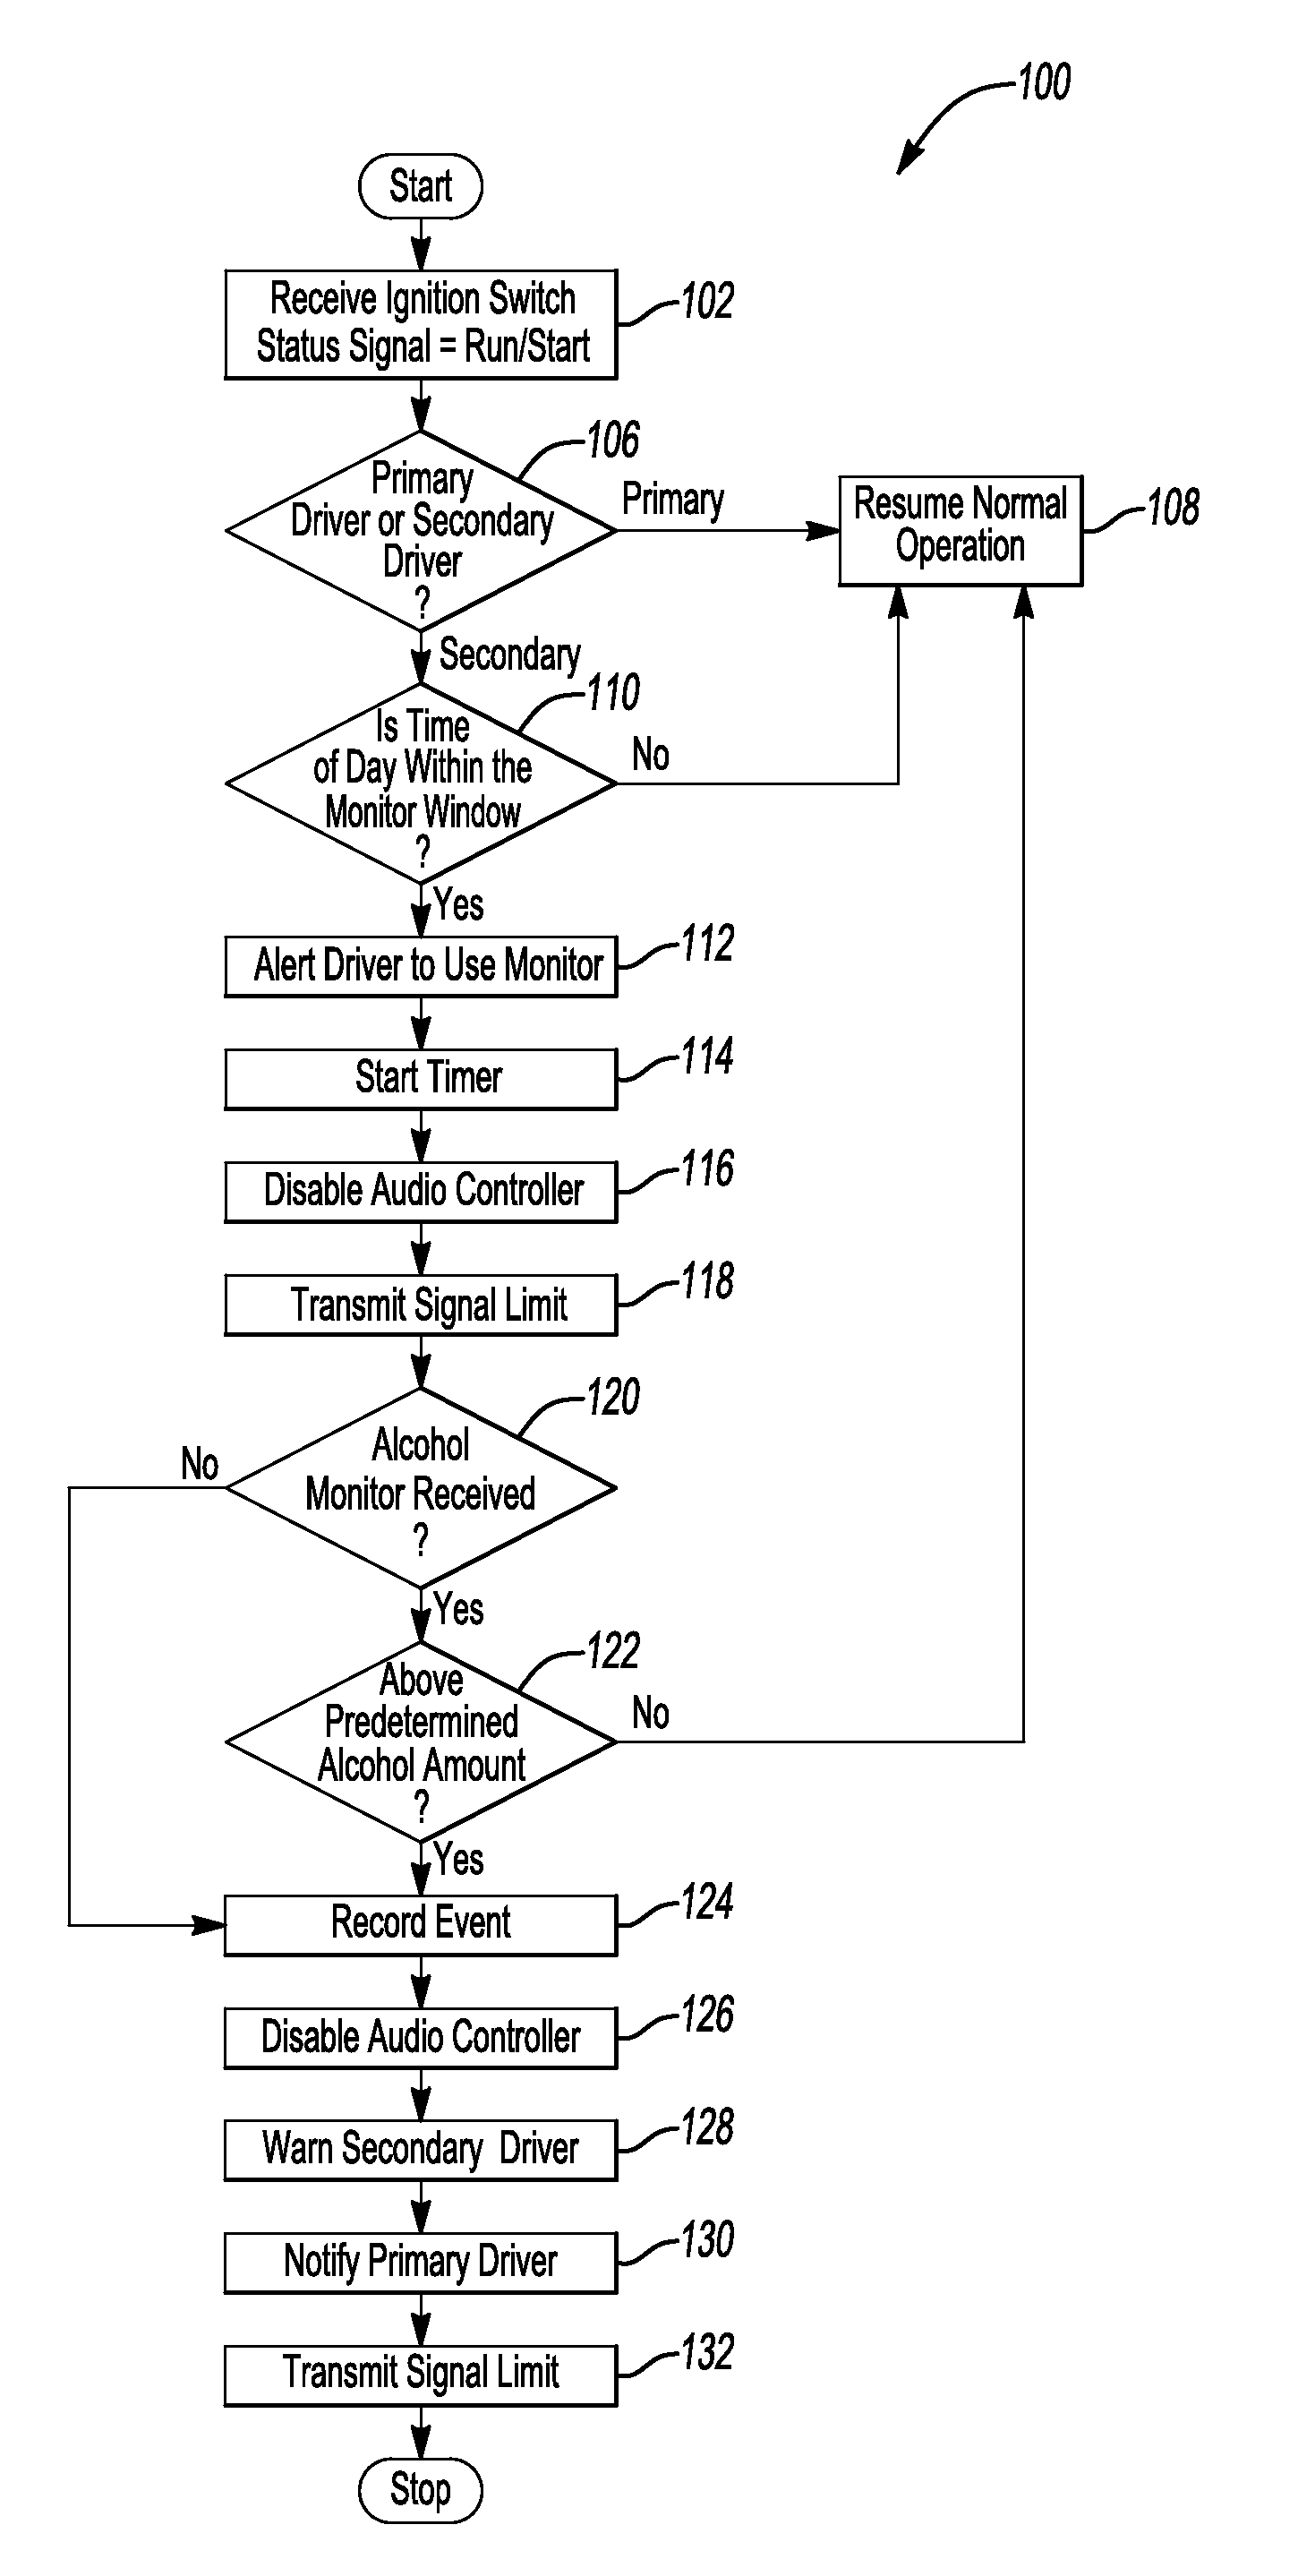 System and method for alcohol monitor based on driver status